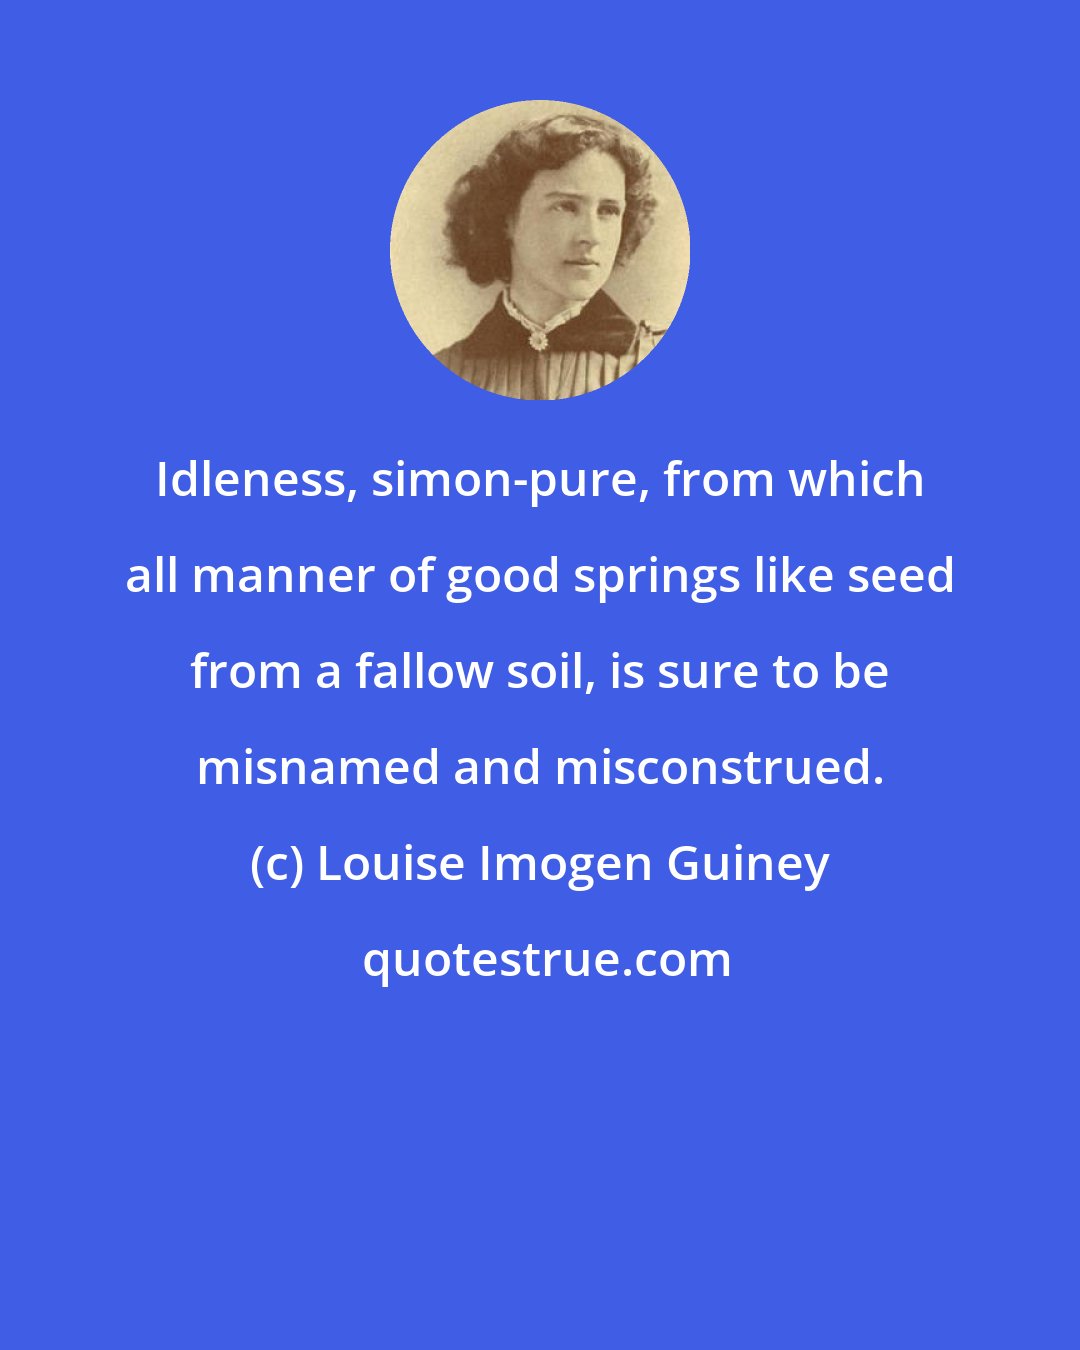 Louise Imogen Guiney: Idleness, simon-pure, from which all manner of good springs like seed from a fallow soil, is sure to be misnamed and misconstrued.